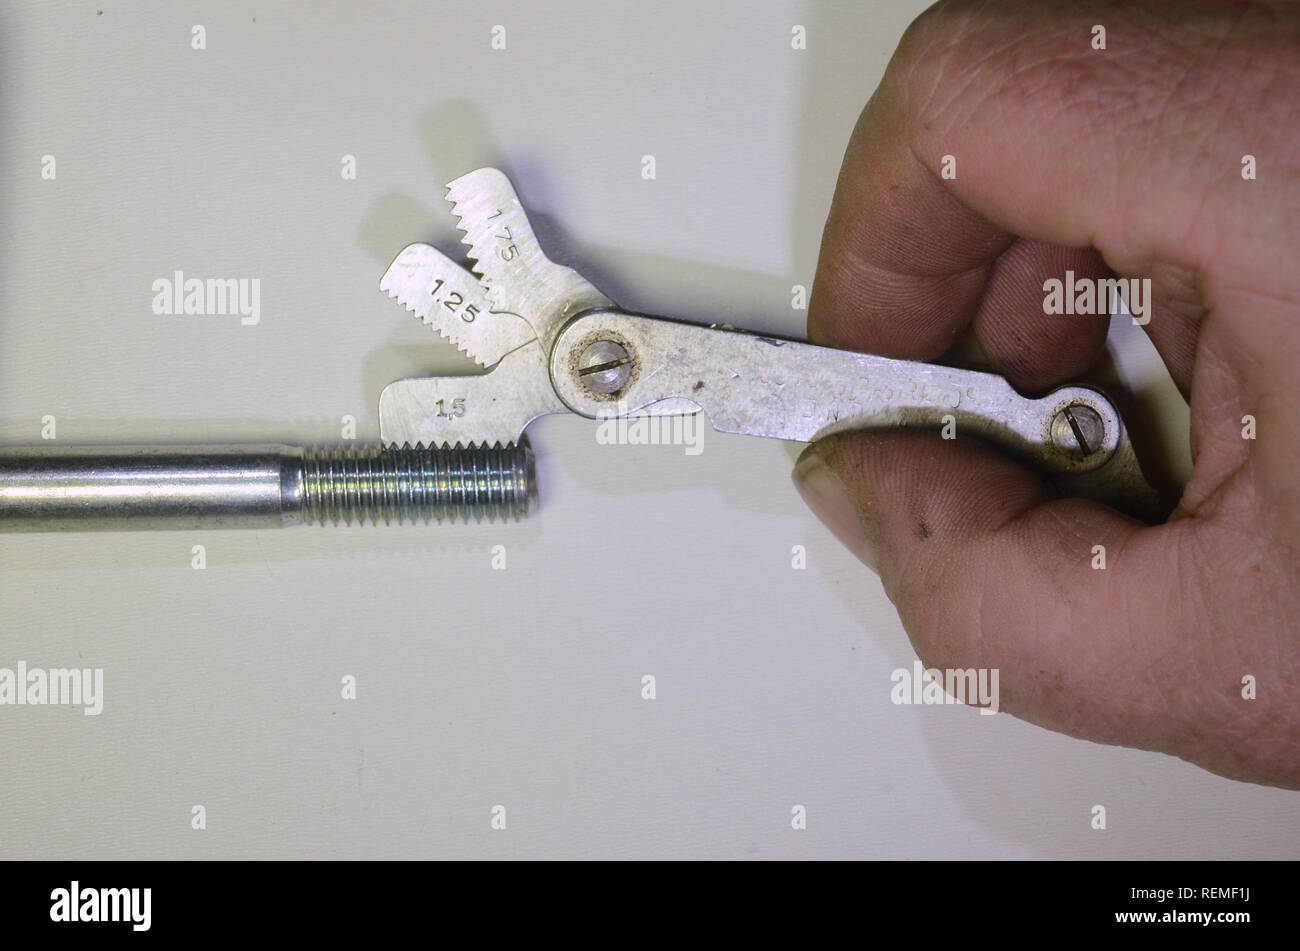 Determining the increase of a thread on a metric bolt. A pitch gauge is used, 1,25 mm and 1,75 mm blades will not fit, but 1,5mm will. Stock Photo